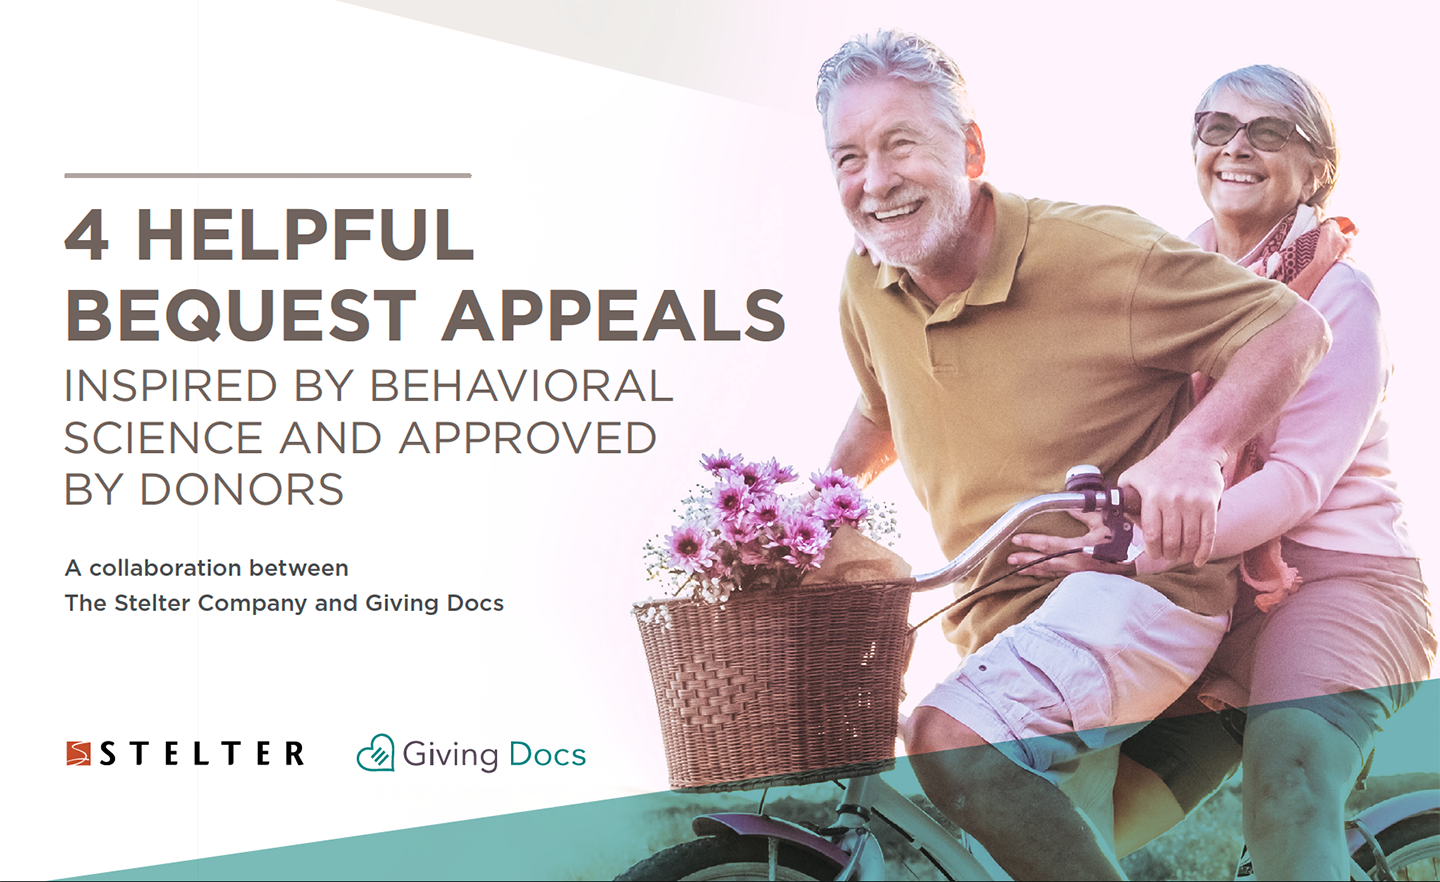 4 Helpful Bequest Appeals Inspired by Behavioral Science and Approved by Donors